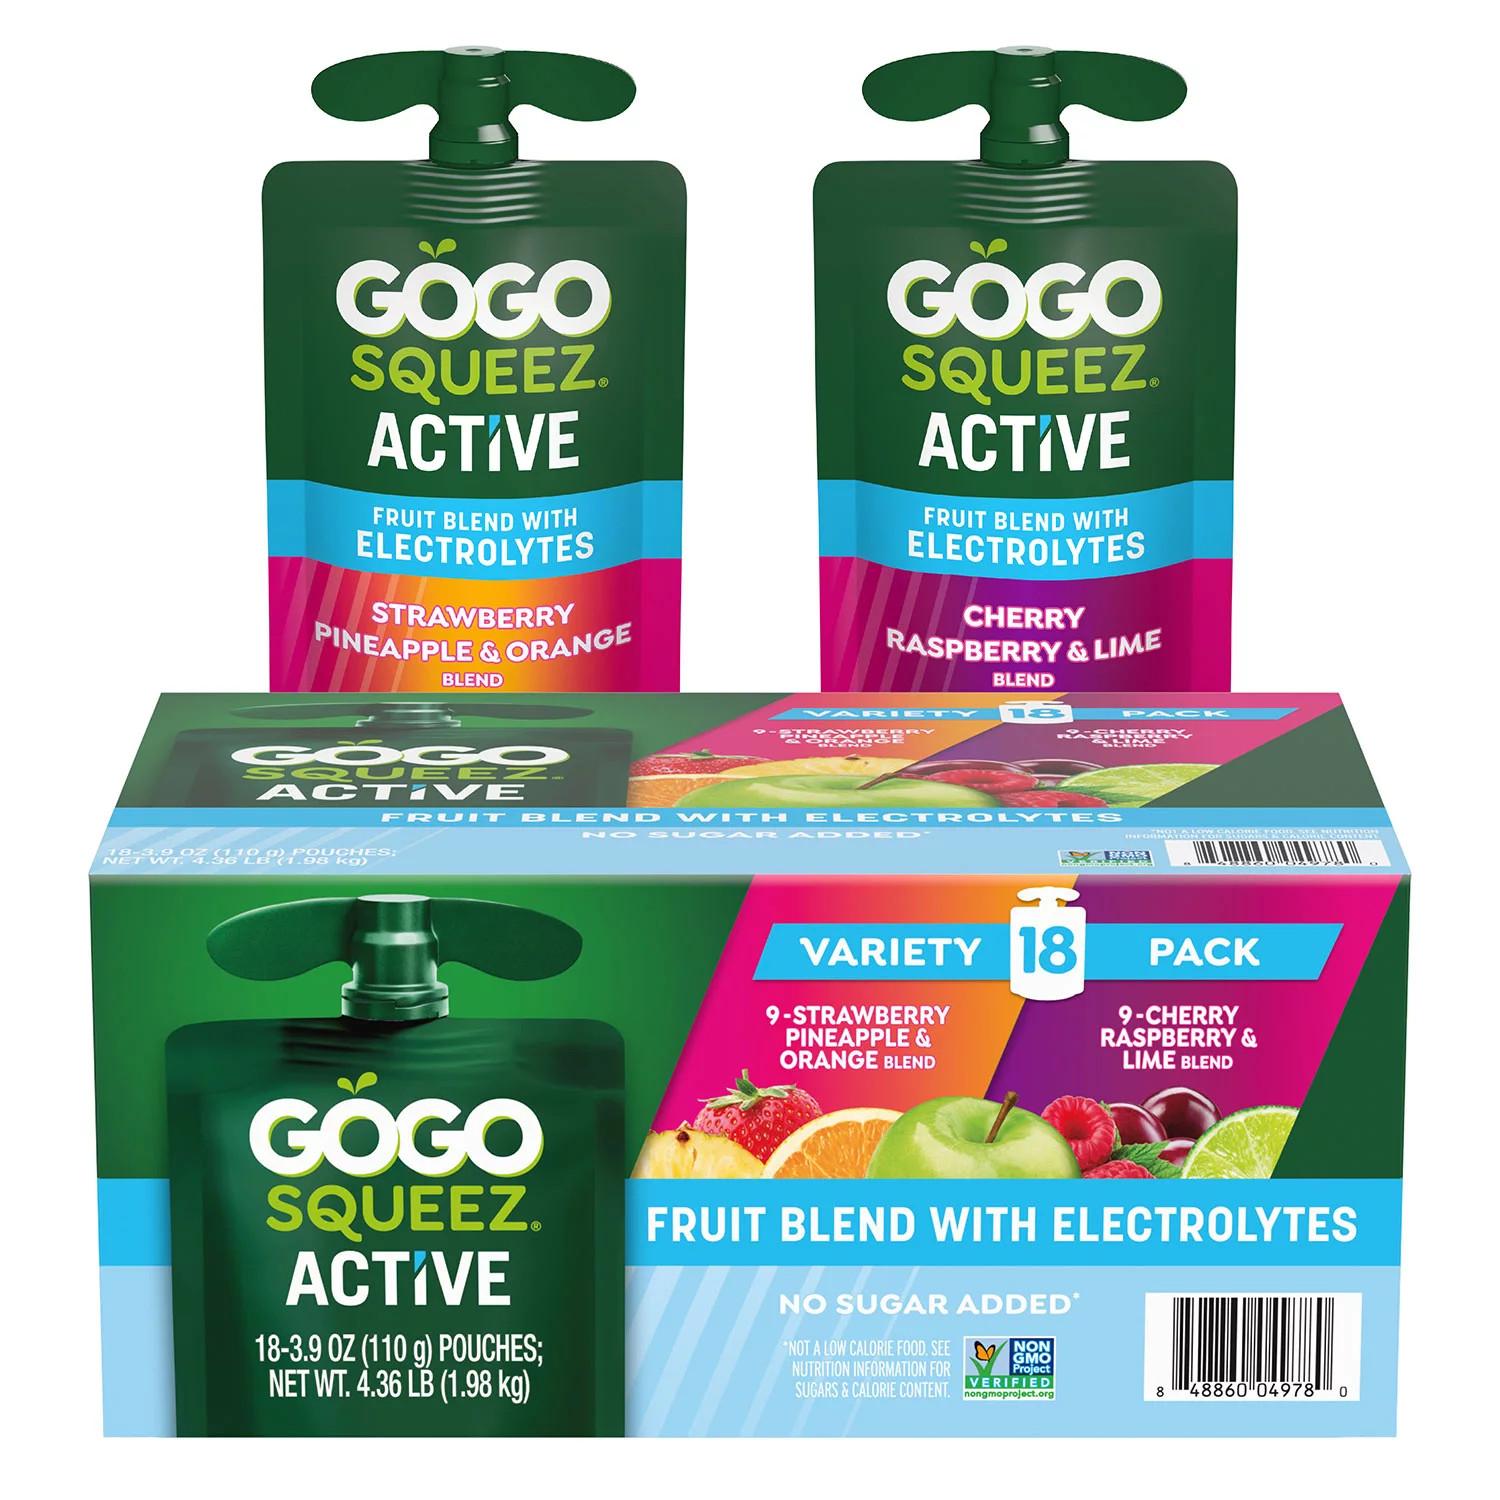 GoGo squeeZ Active Fruit Blend with Electrolytes Variety Pack